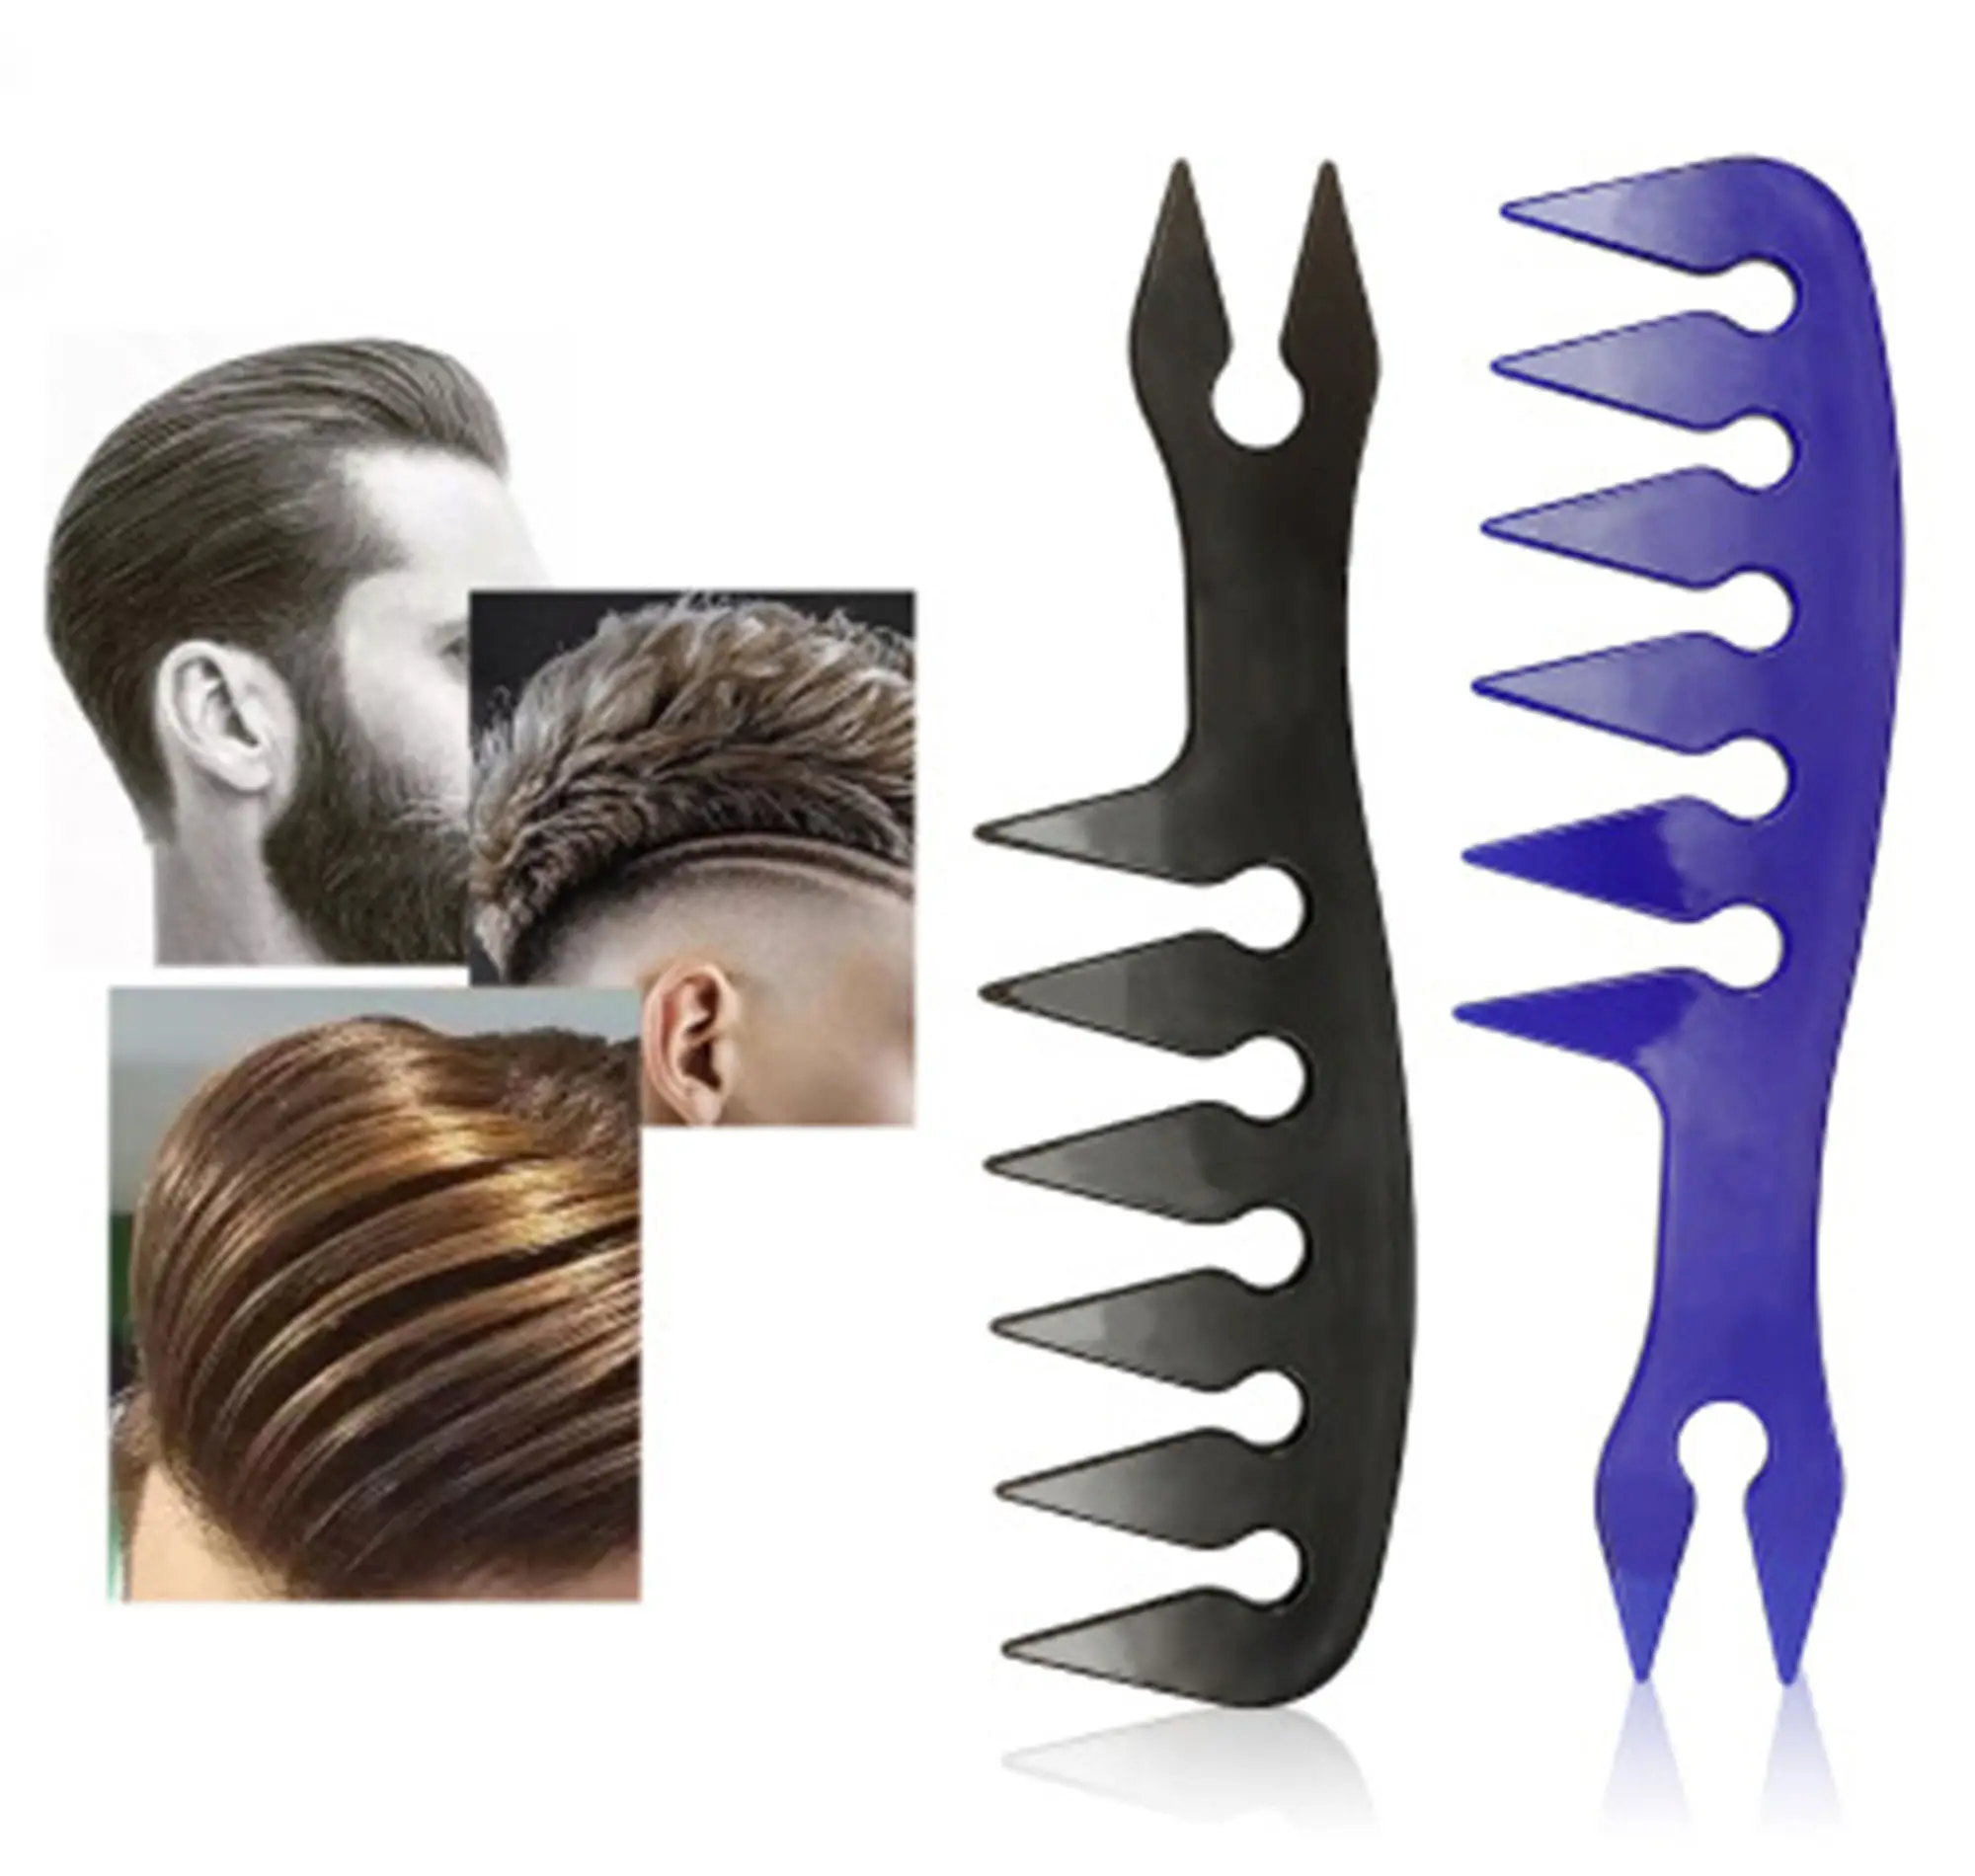 New Design Customized Hair Styling Texture Comb For Oil Head